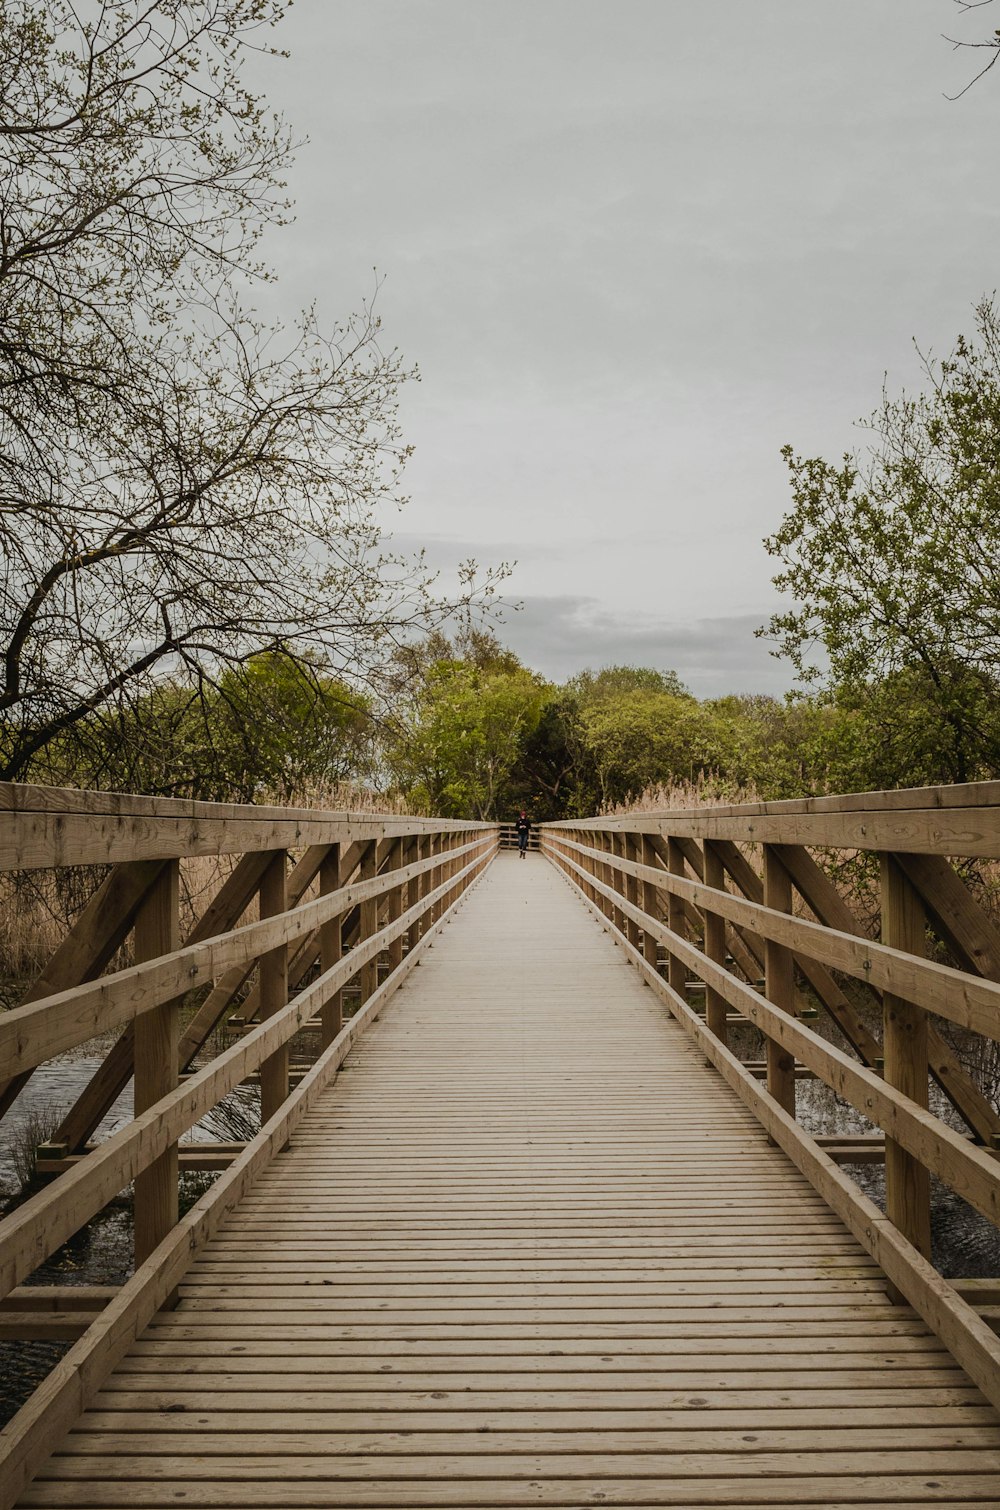 brown wooden bridge over green trees during daytime